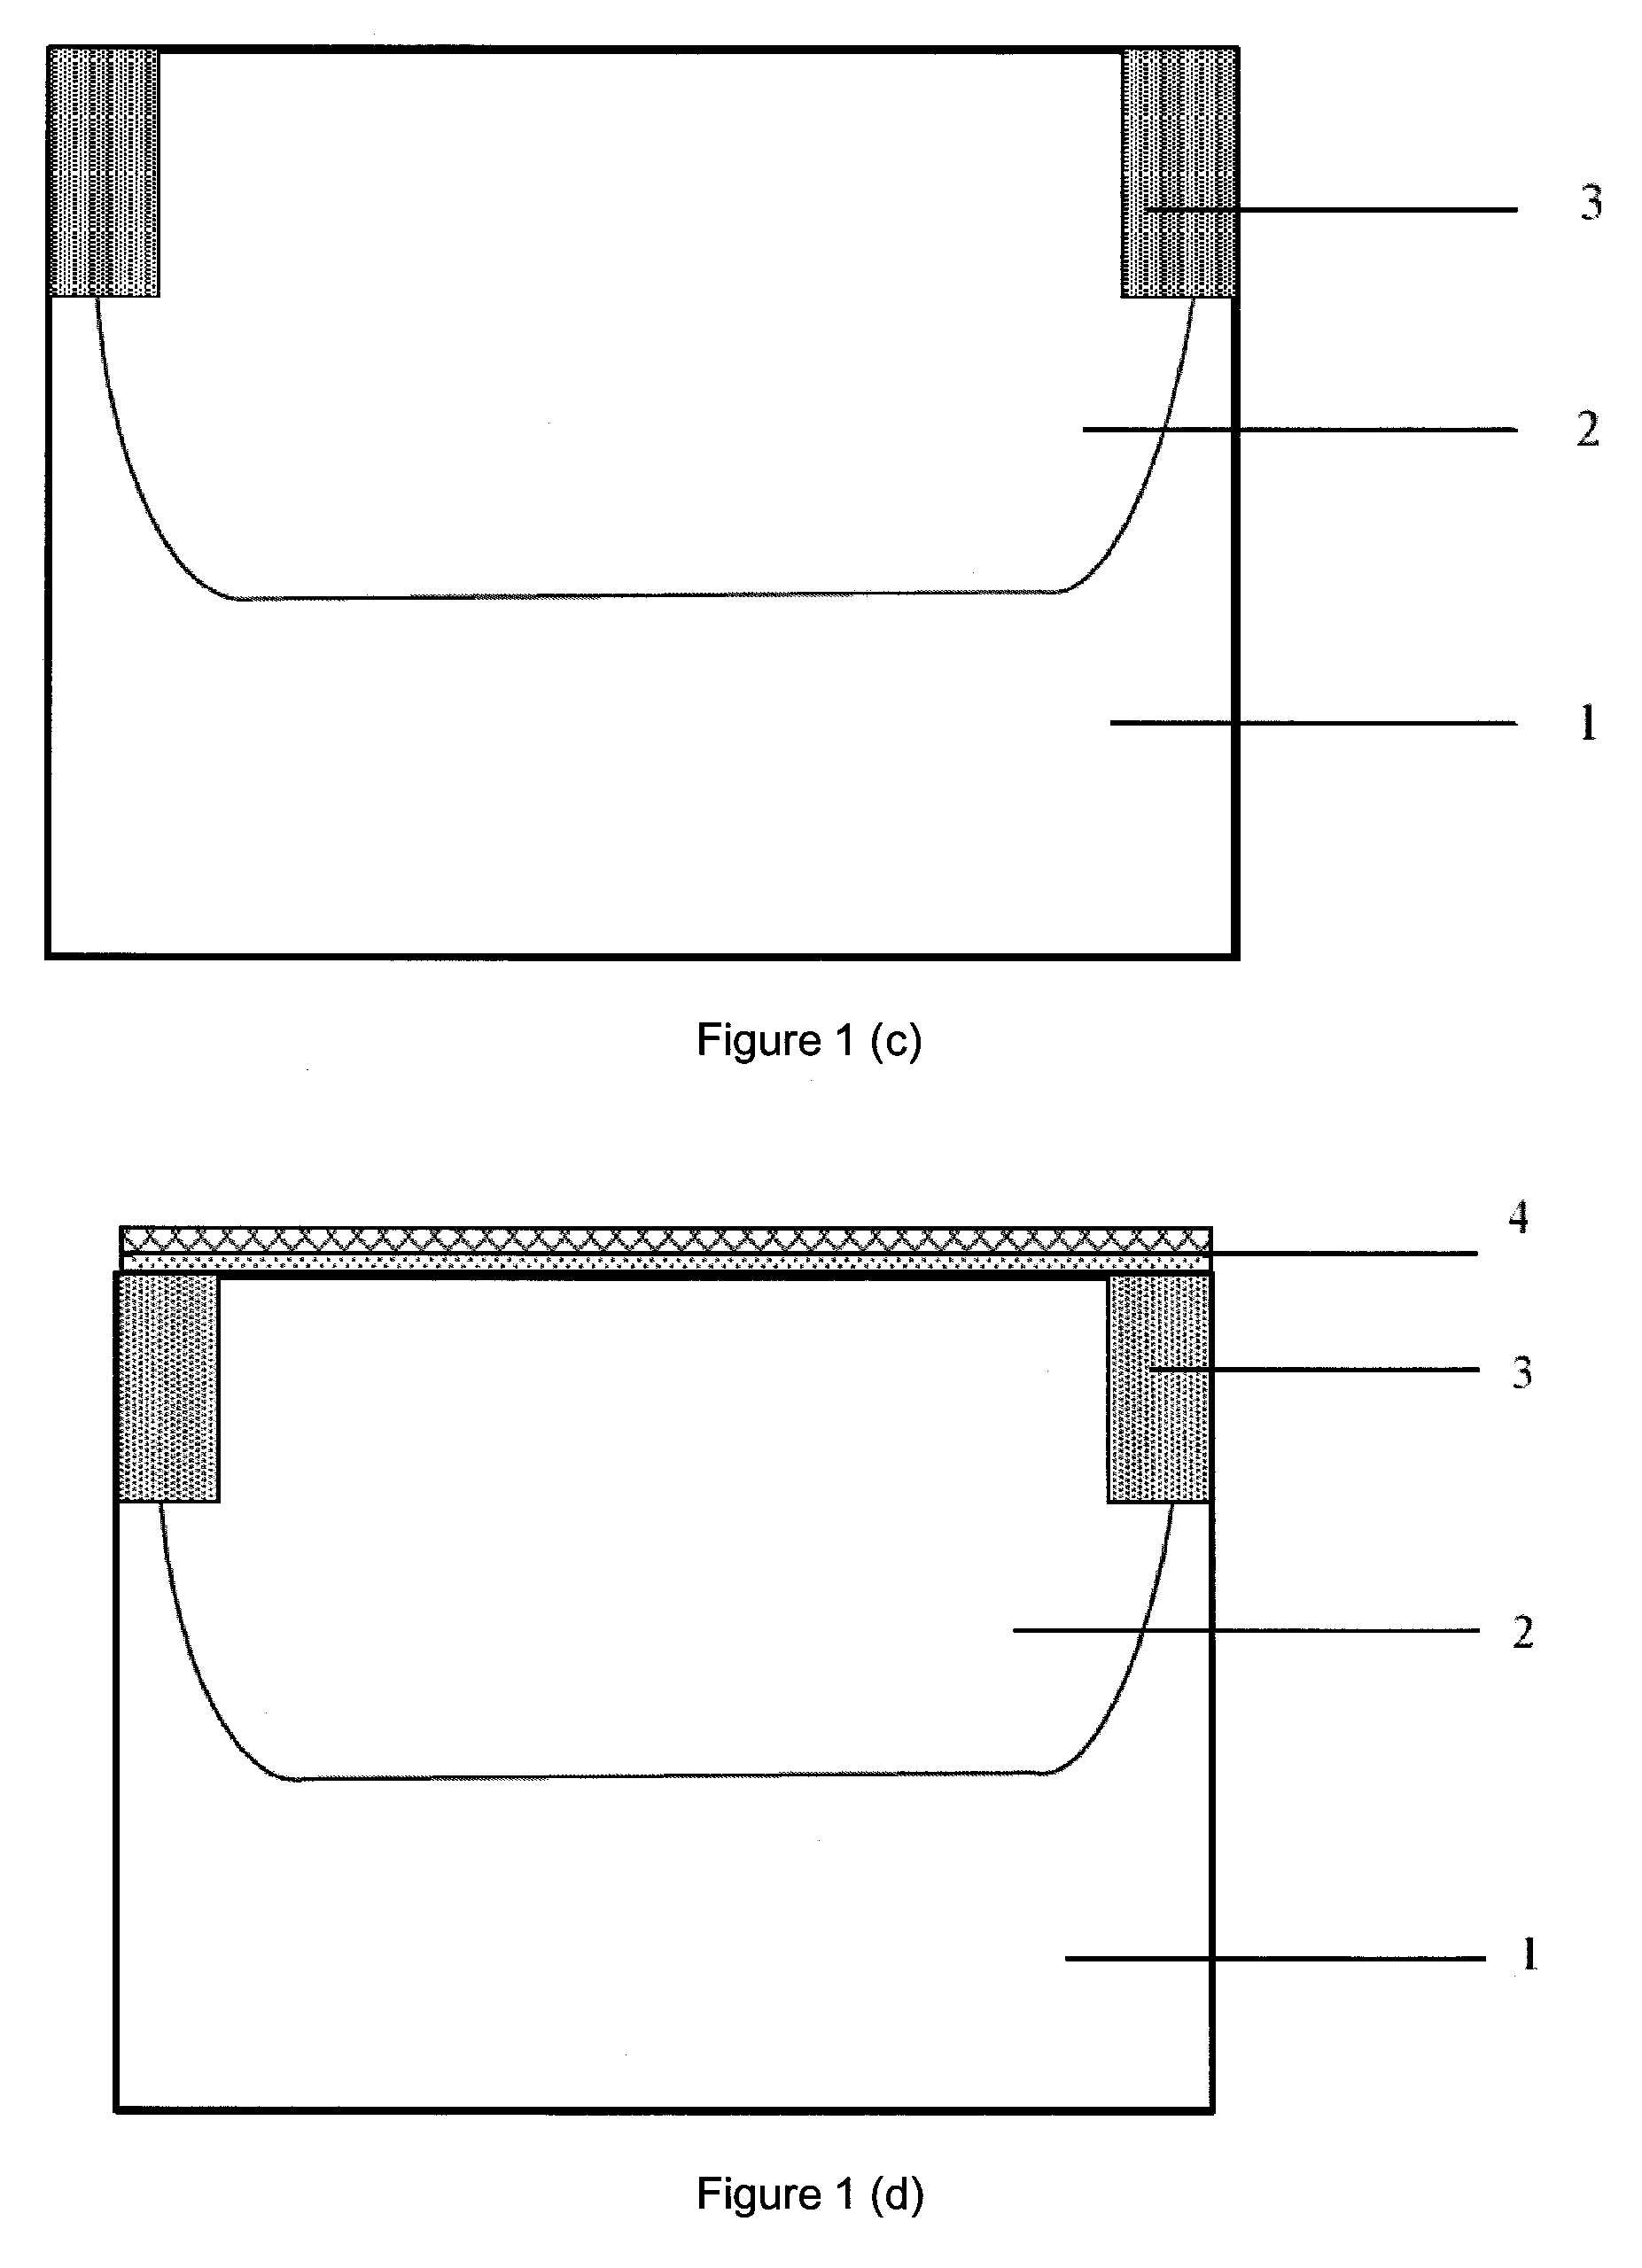 Ge-based NMOS device and method for fabricating the same